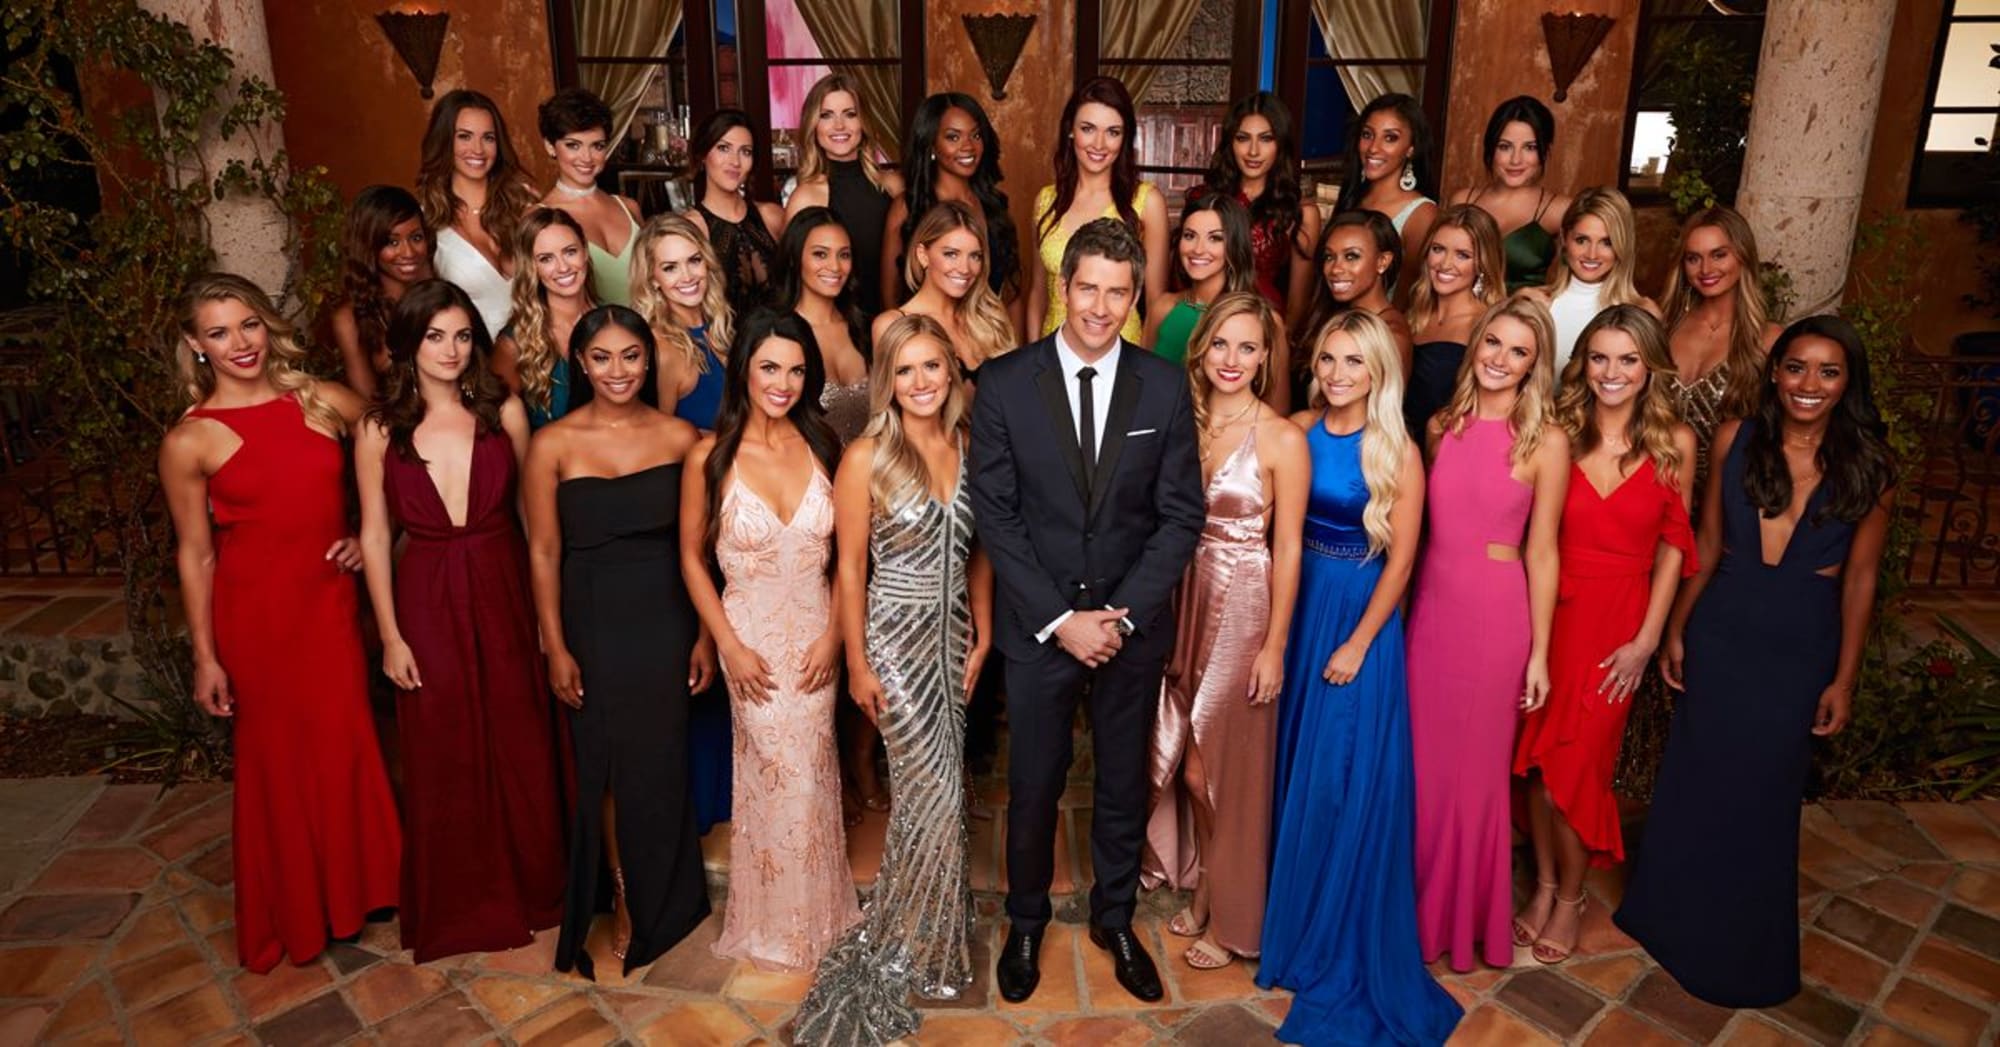 The Bachelor weekly episode schedule When does the final rose ceremony